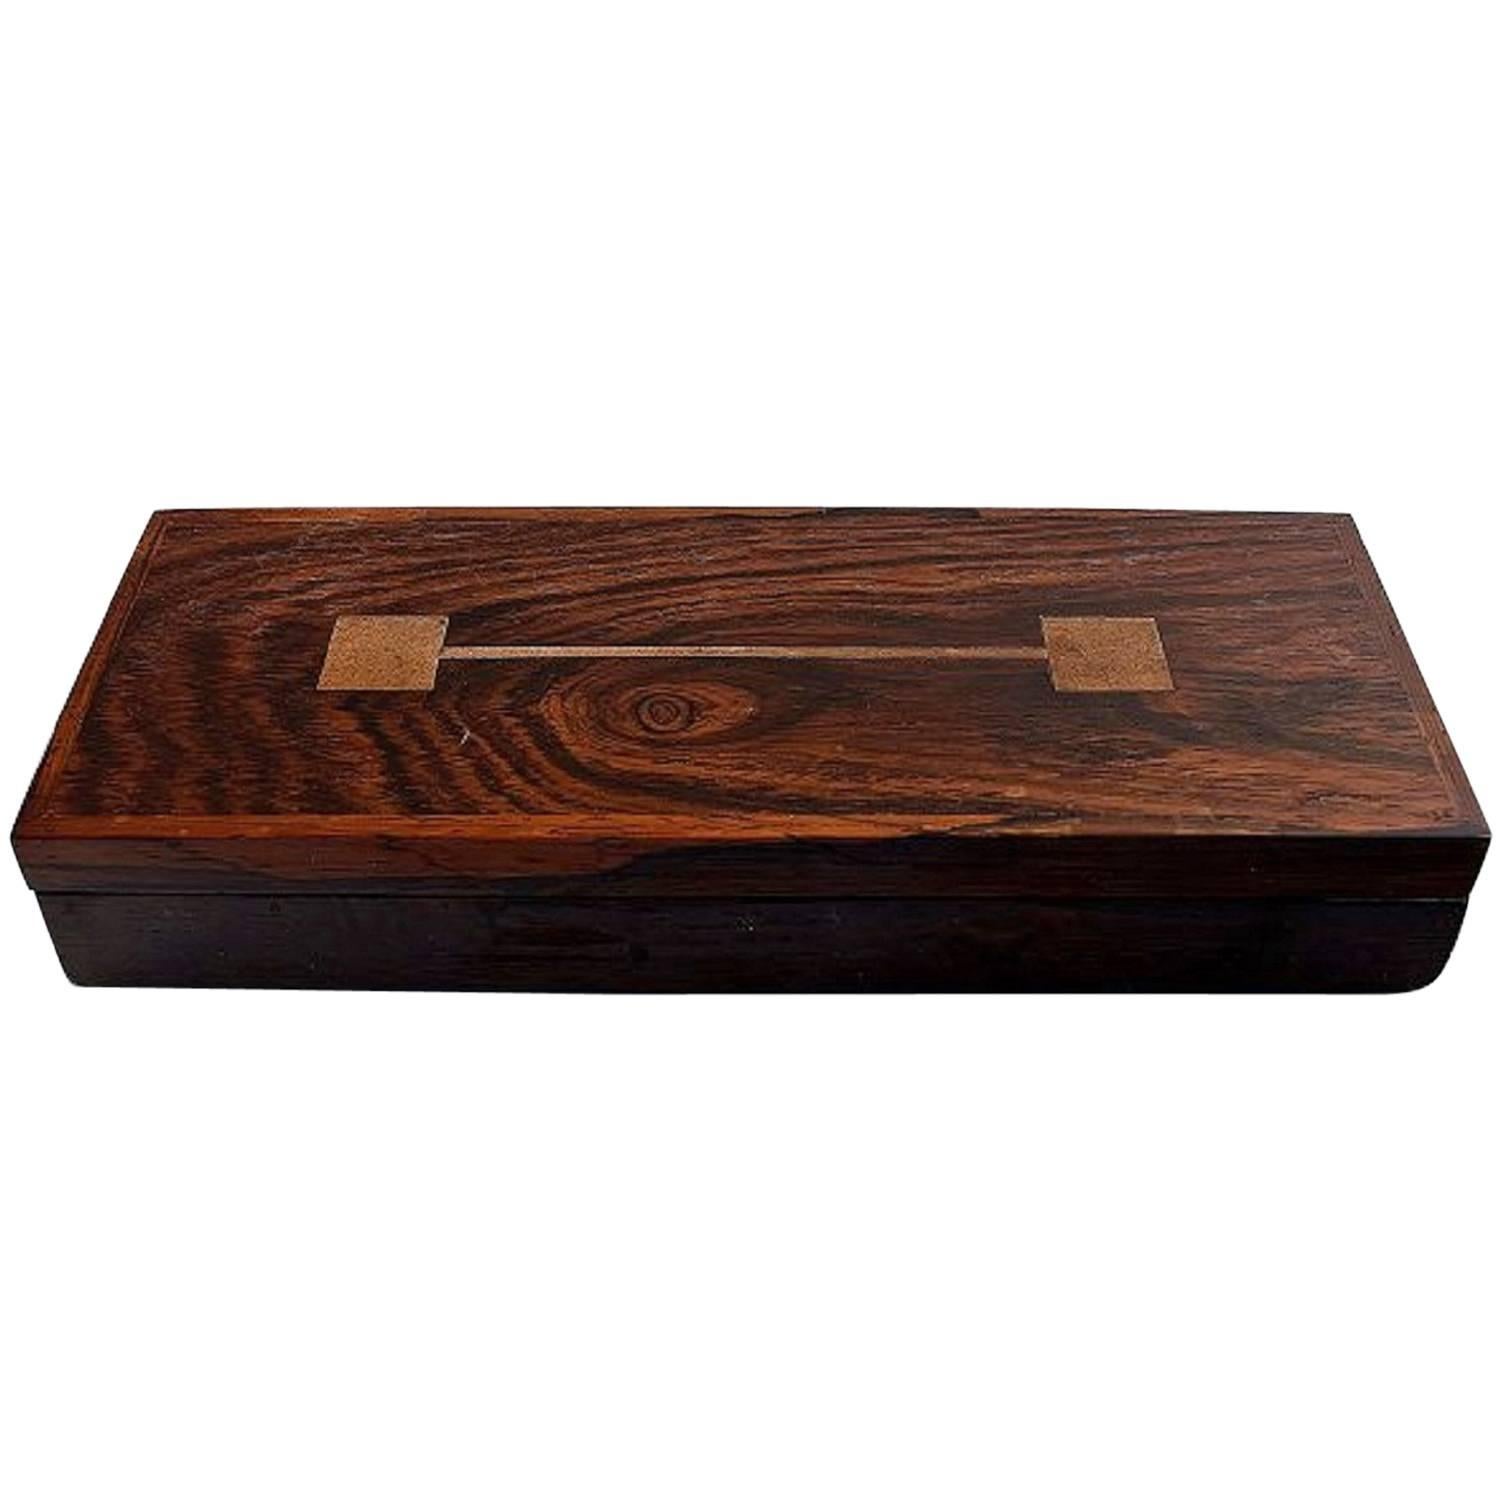 Hans Hansen, Shrine / Box in Rosewood Inlaid with Silver